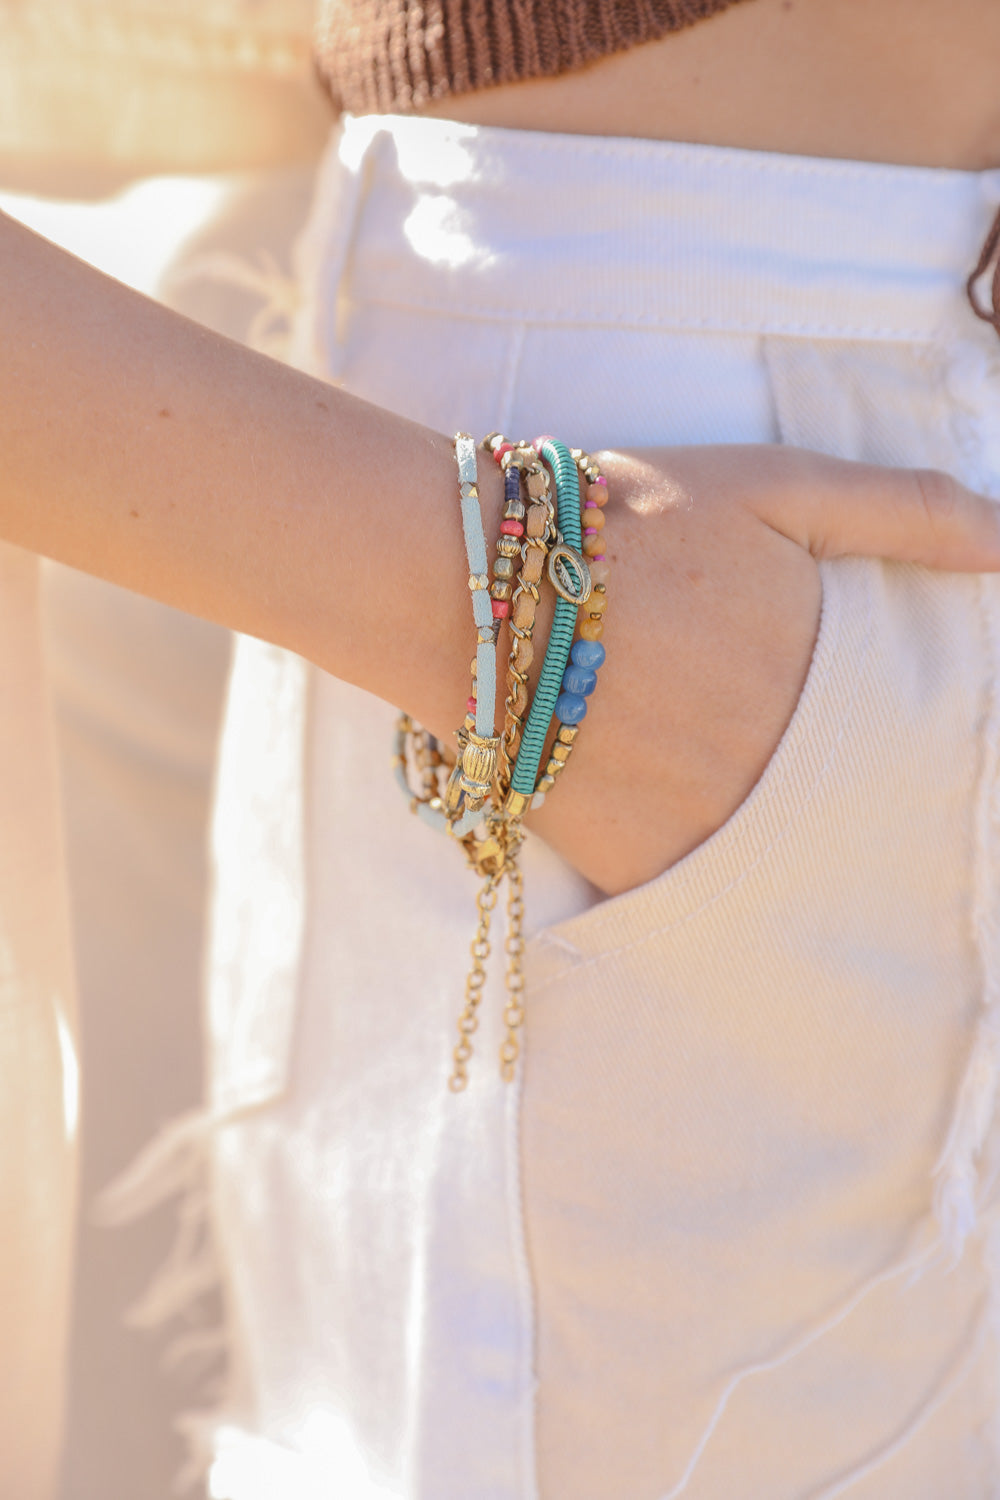 Beaded Gold Stacked Bracelet Jewelry Teal